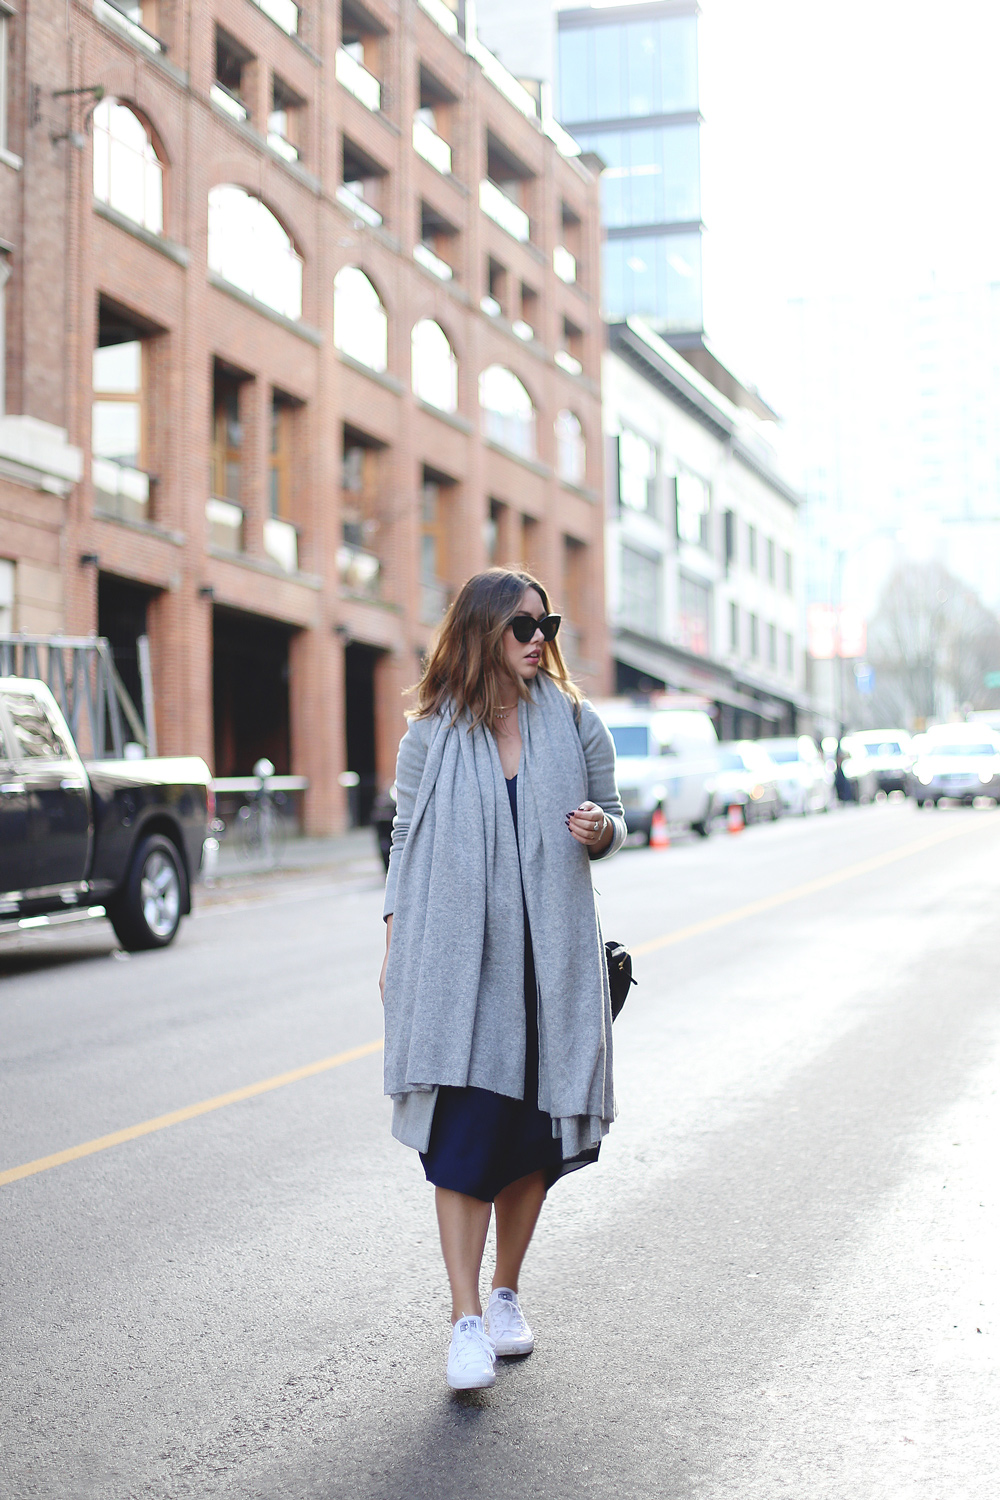 How to wear Converse sneakers with a dress in an Aritzia dress, White + Warren cashmere travel wrap, Converse white sneakers, Celine sunglasses styled by To Vogue or Bust